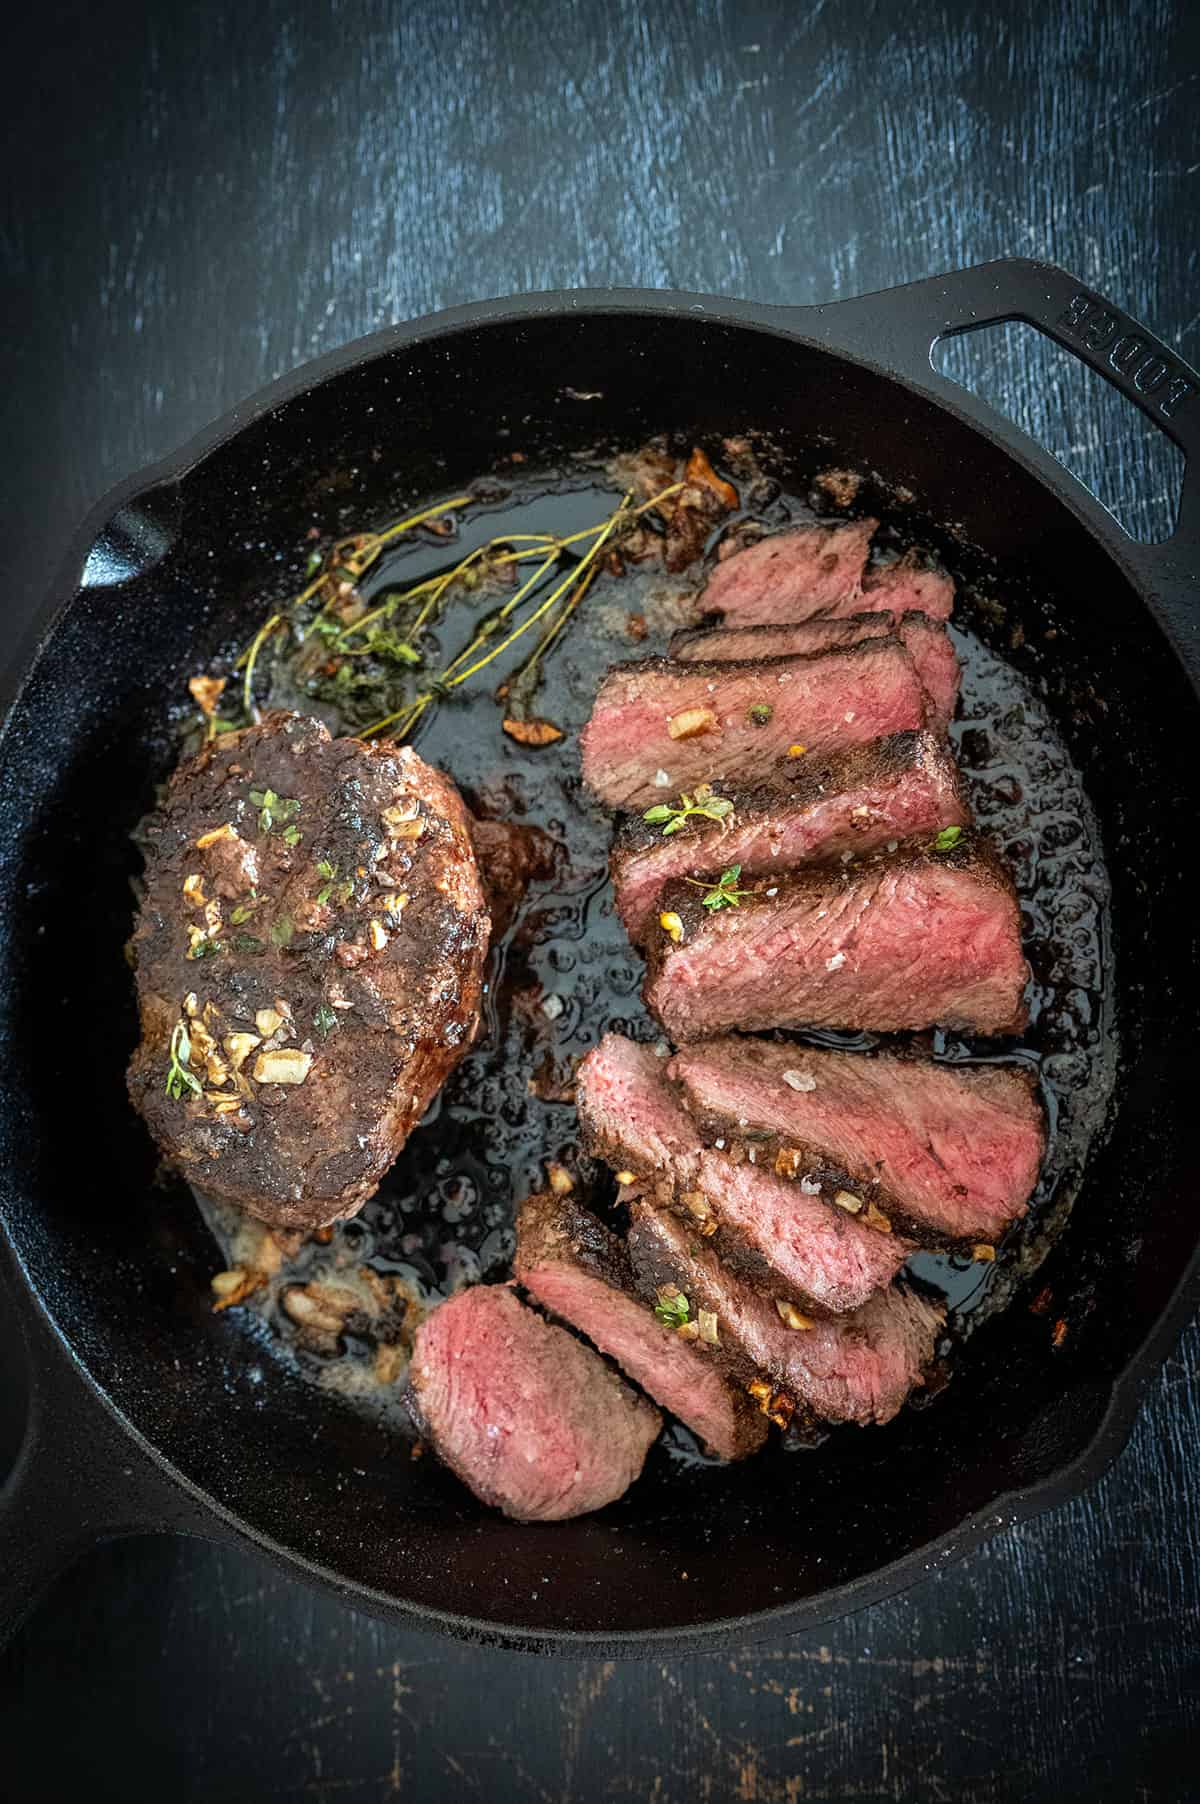 Medium-rare slices of steak in cast iron skillet with herb butter. 